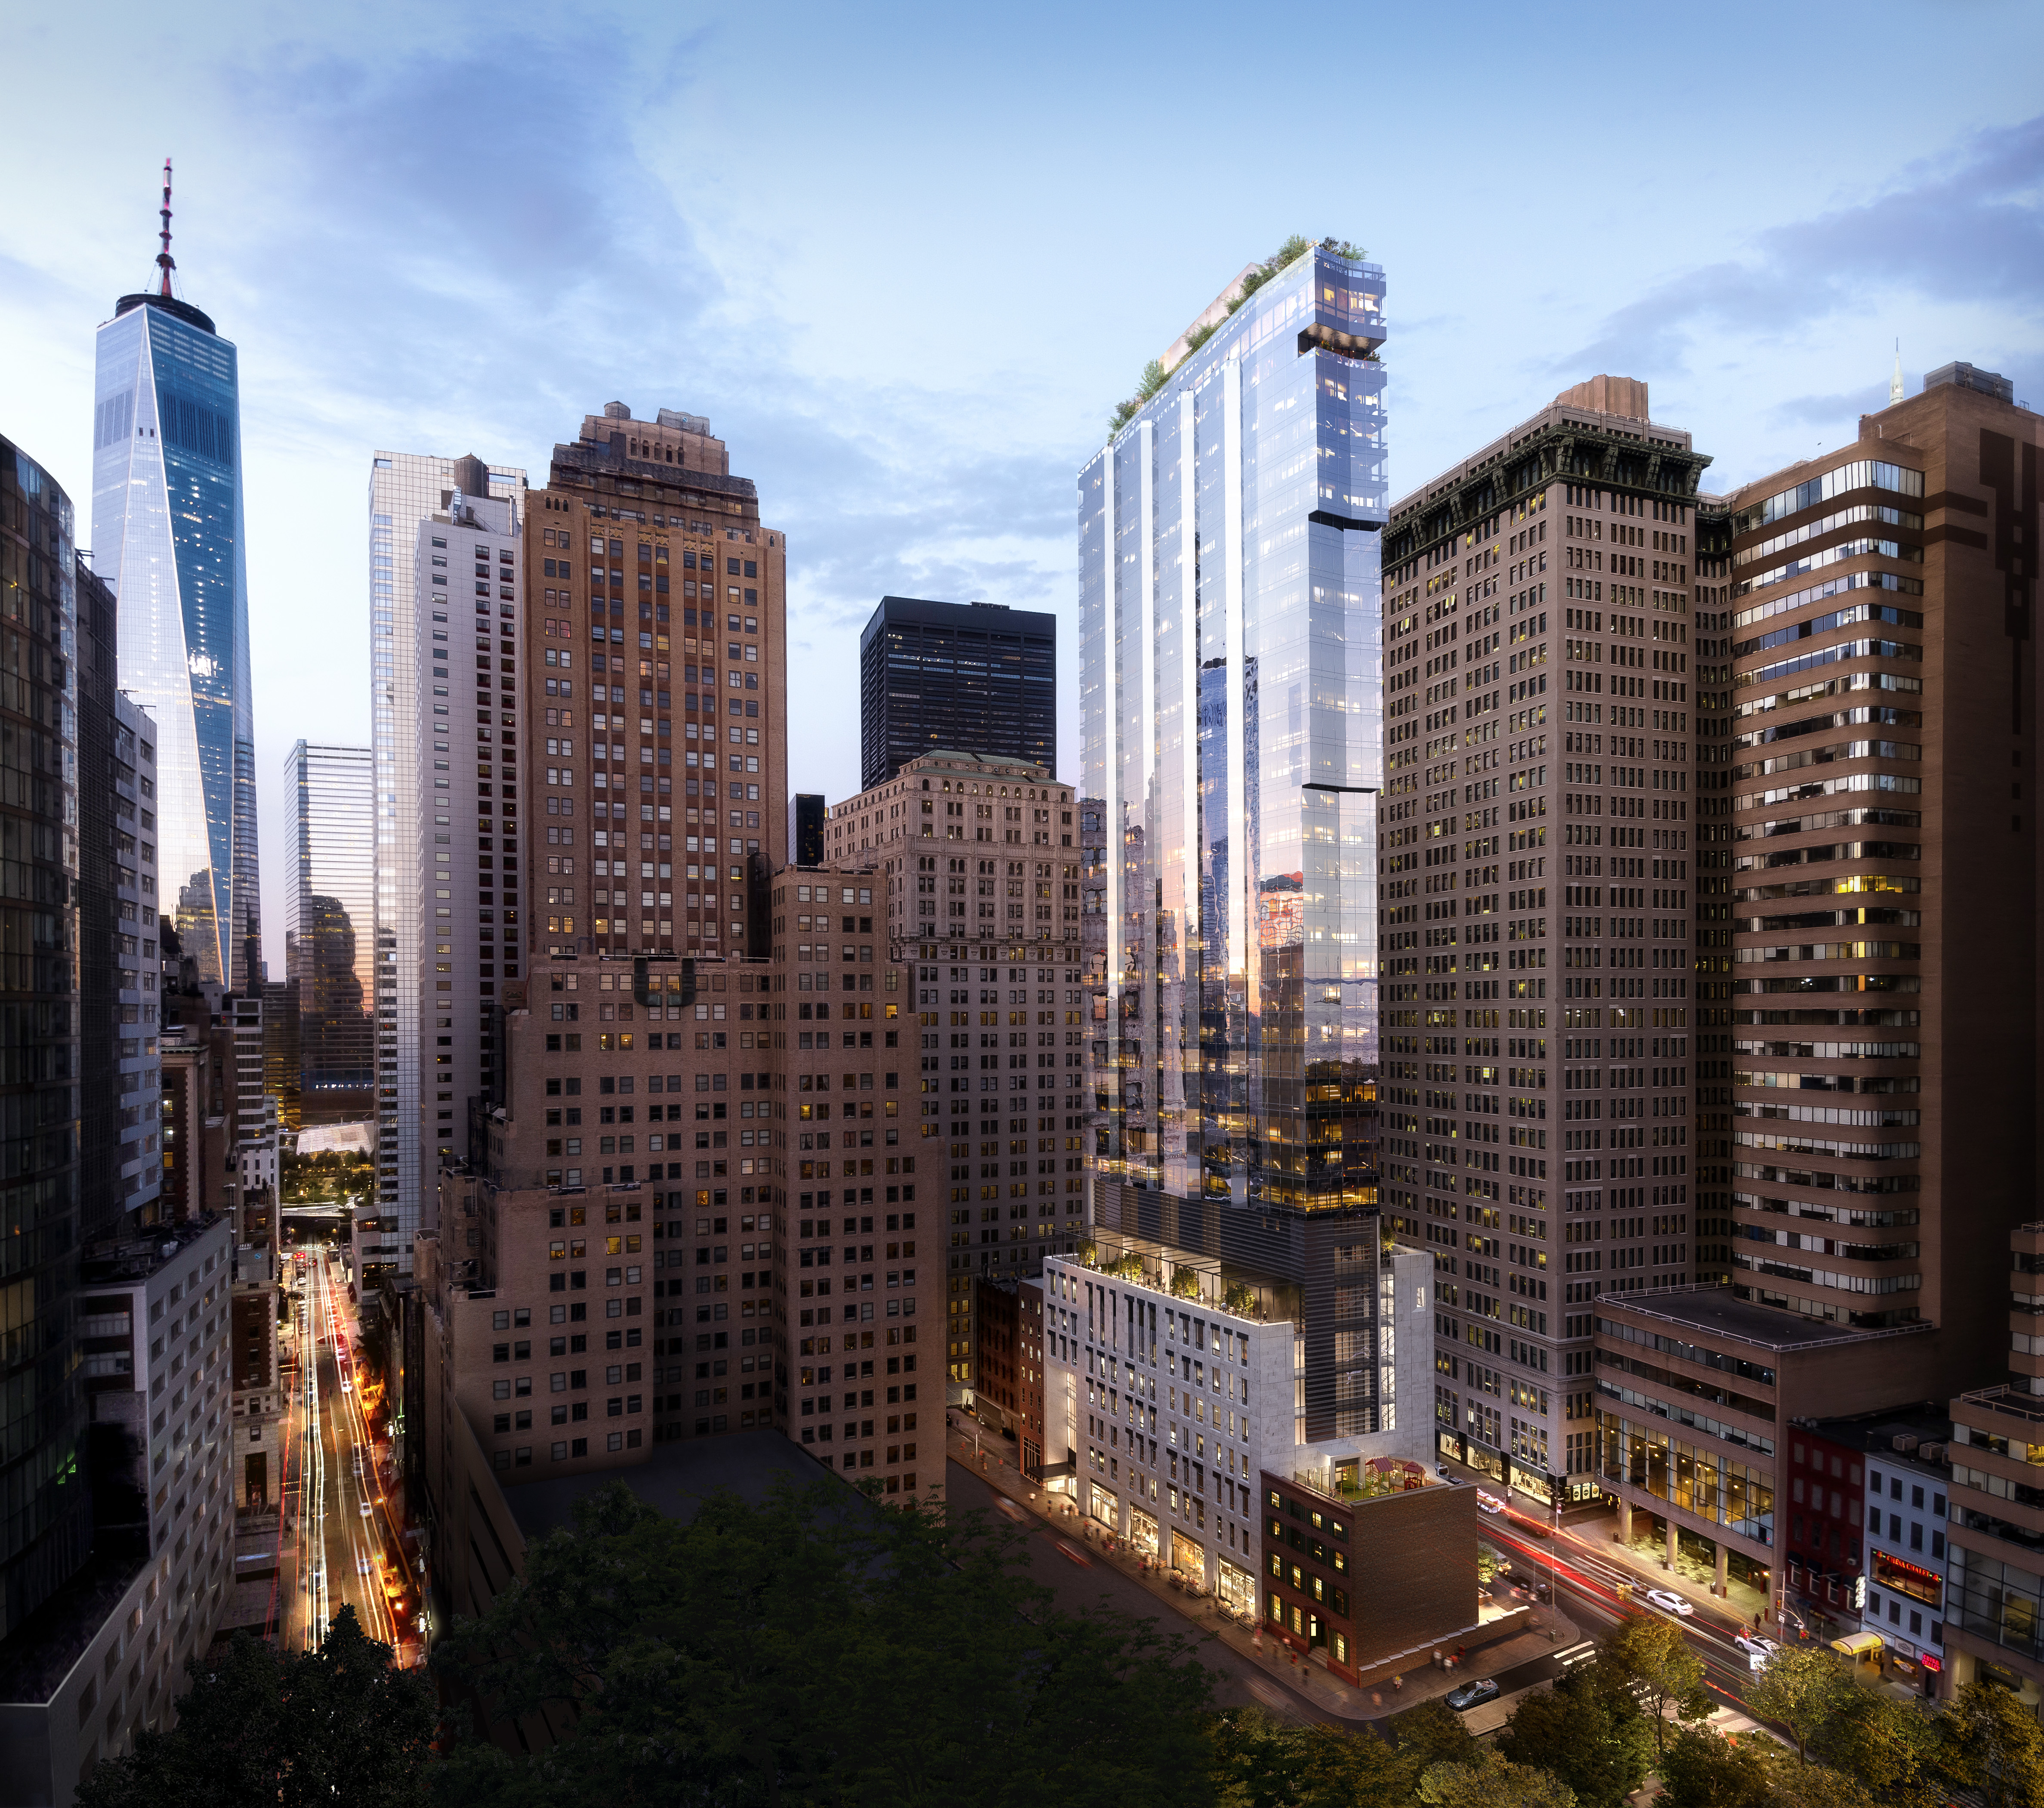 77 Greenwich project, New York. Architectural design by FXCollaborative, rendering by Binyan Studios